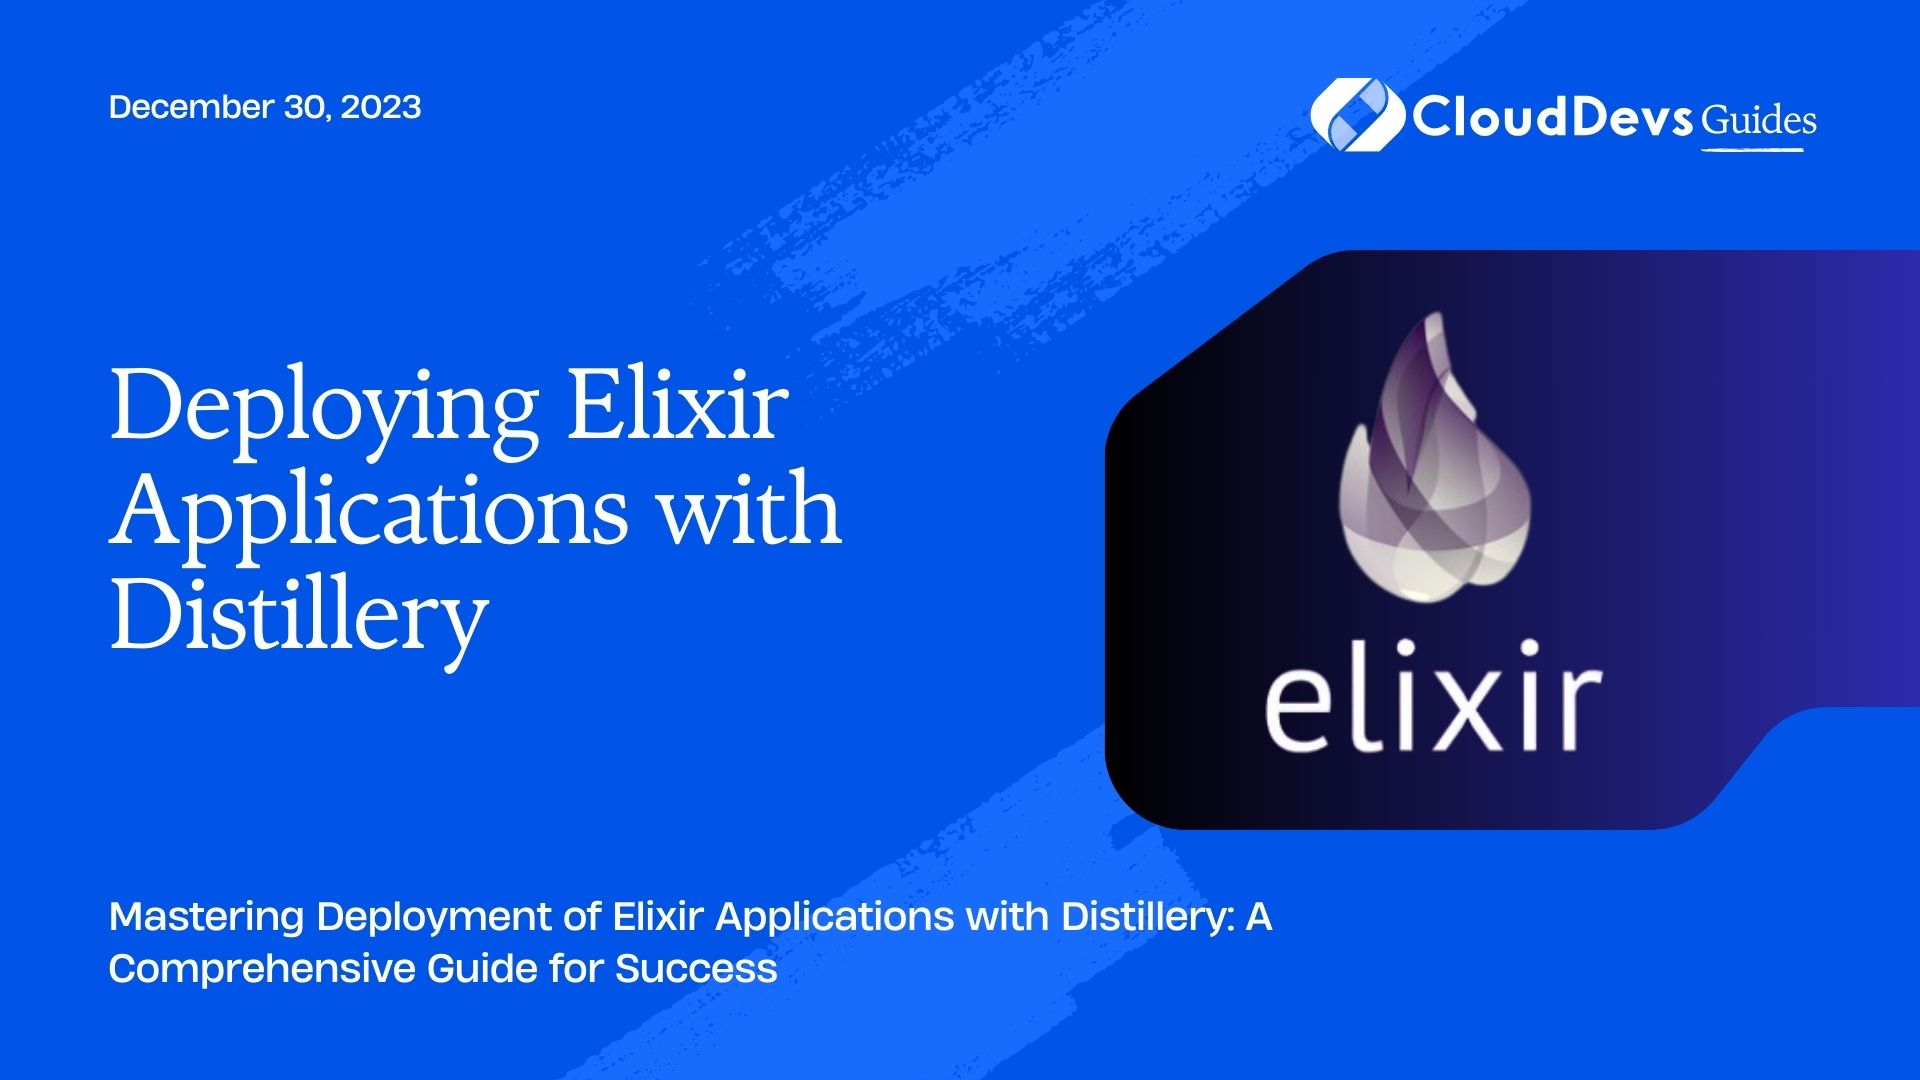 Deploying Elixir Applications with Distillery